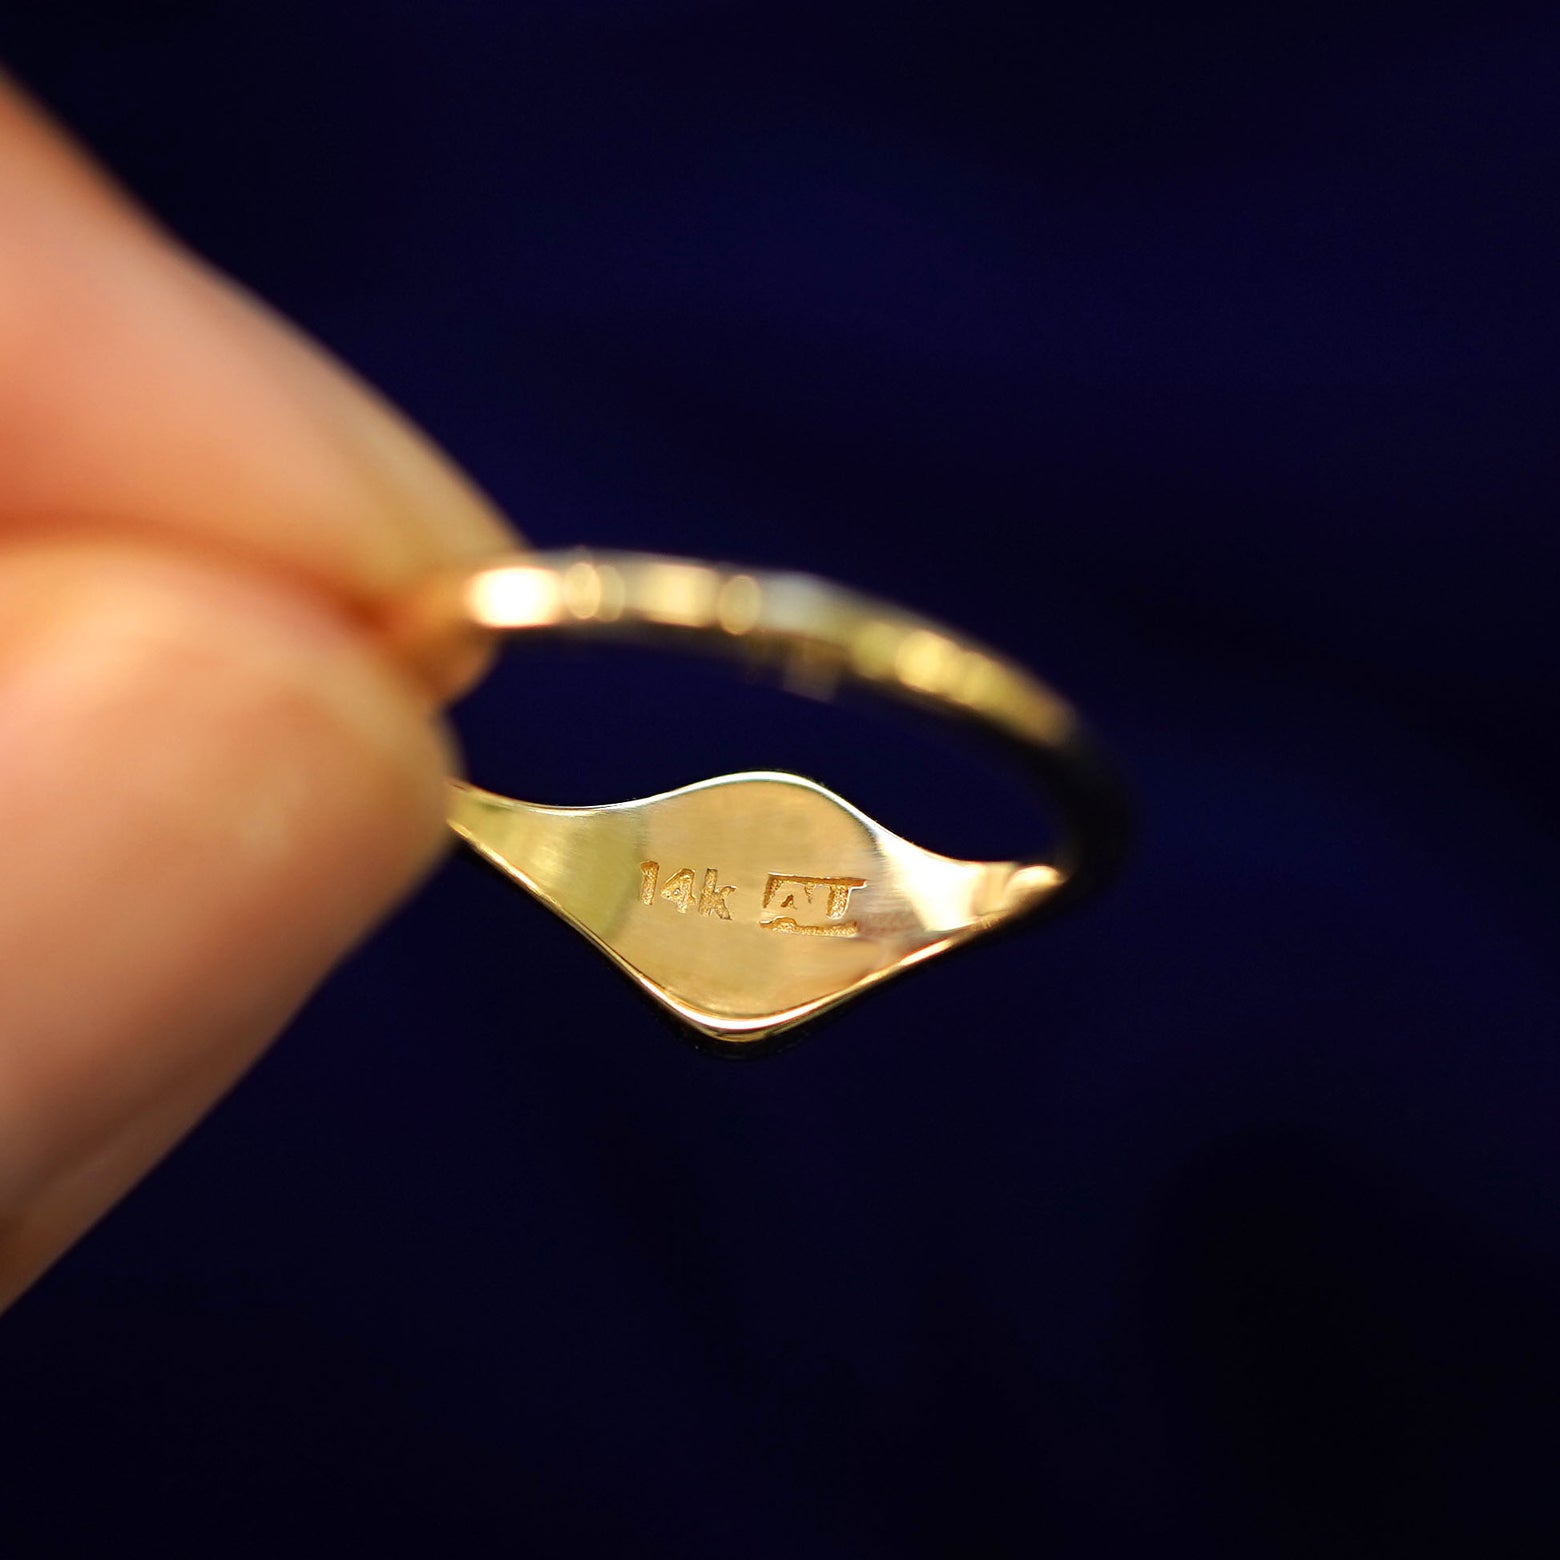 Underside view of a solid 14k gold Oval Signet Ring